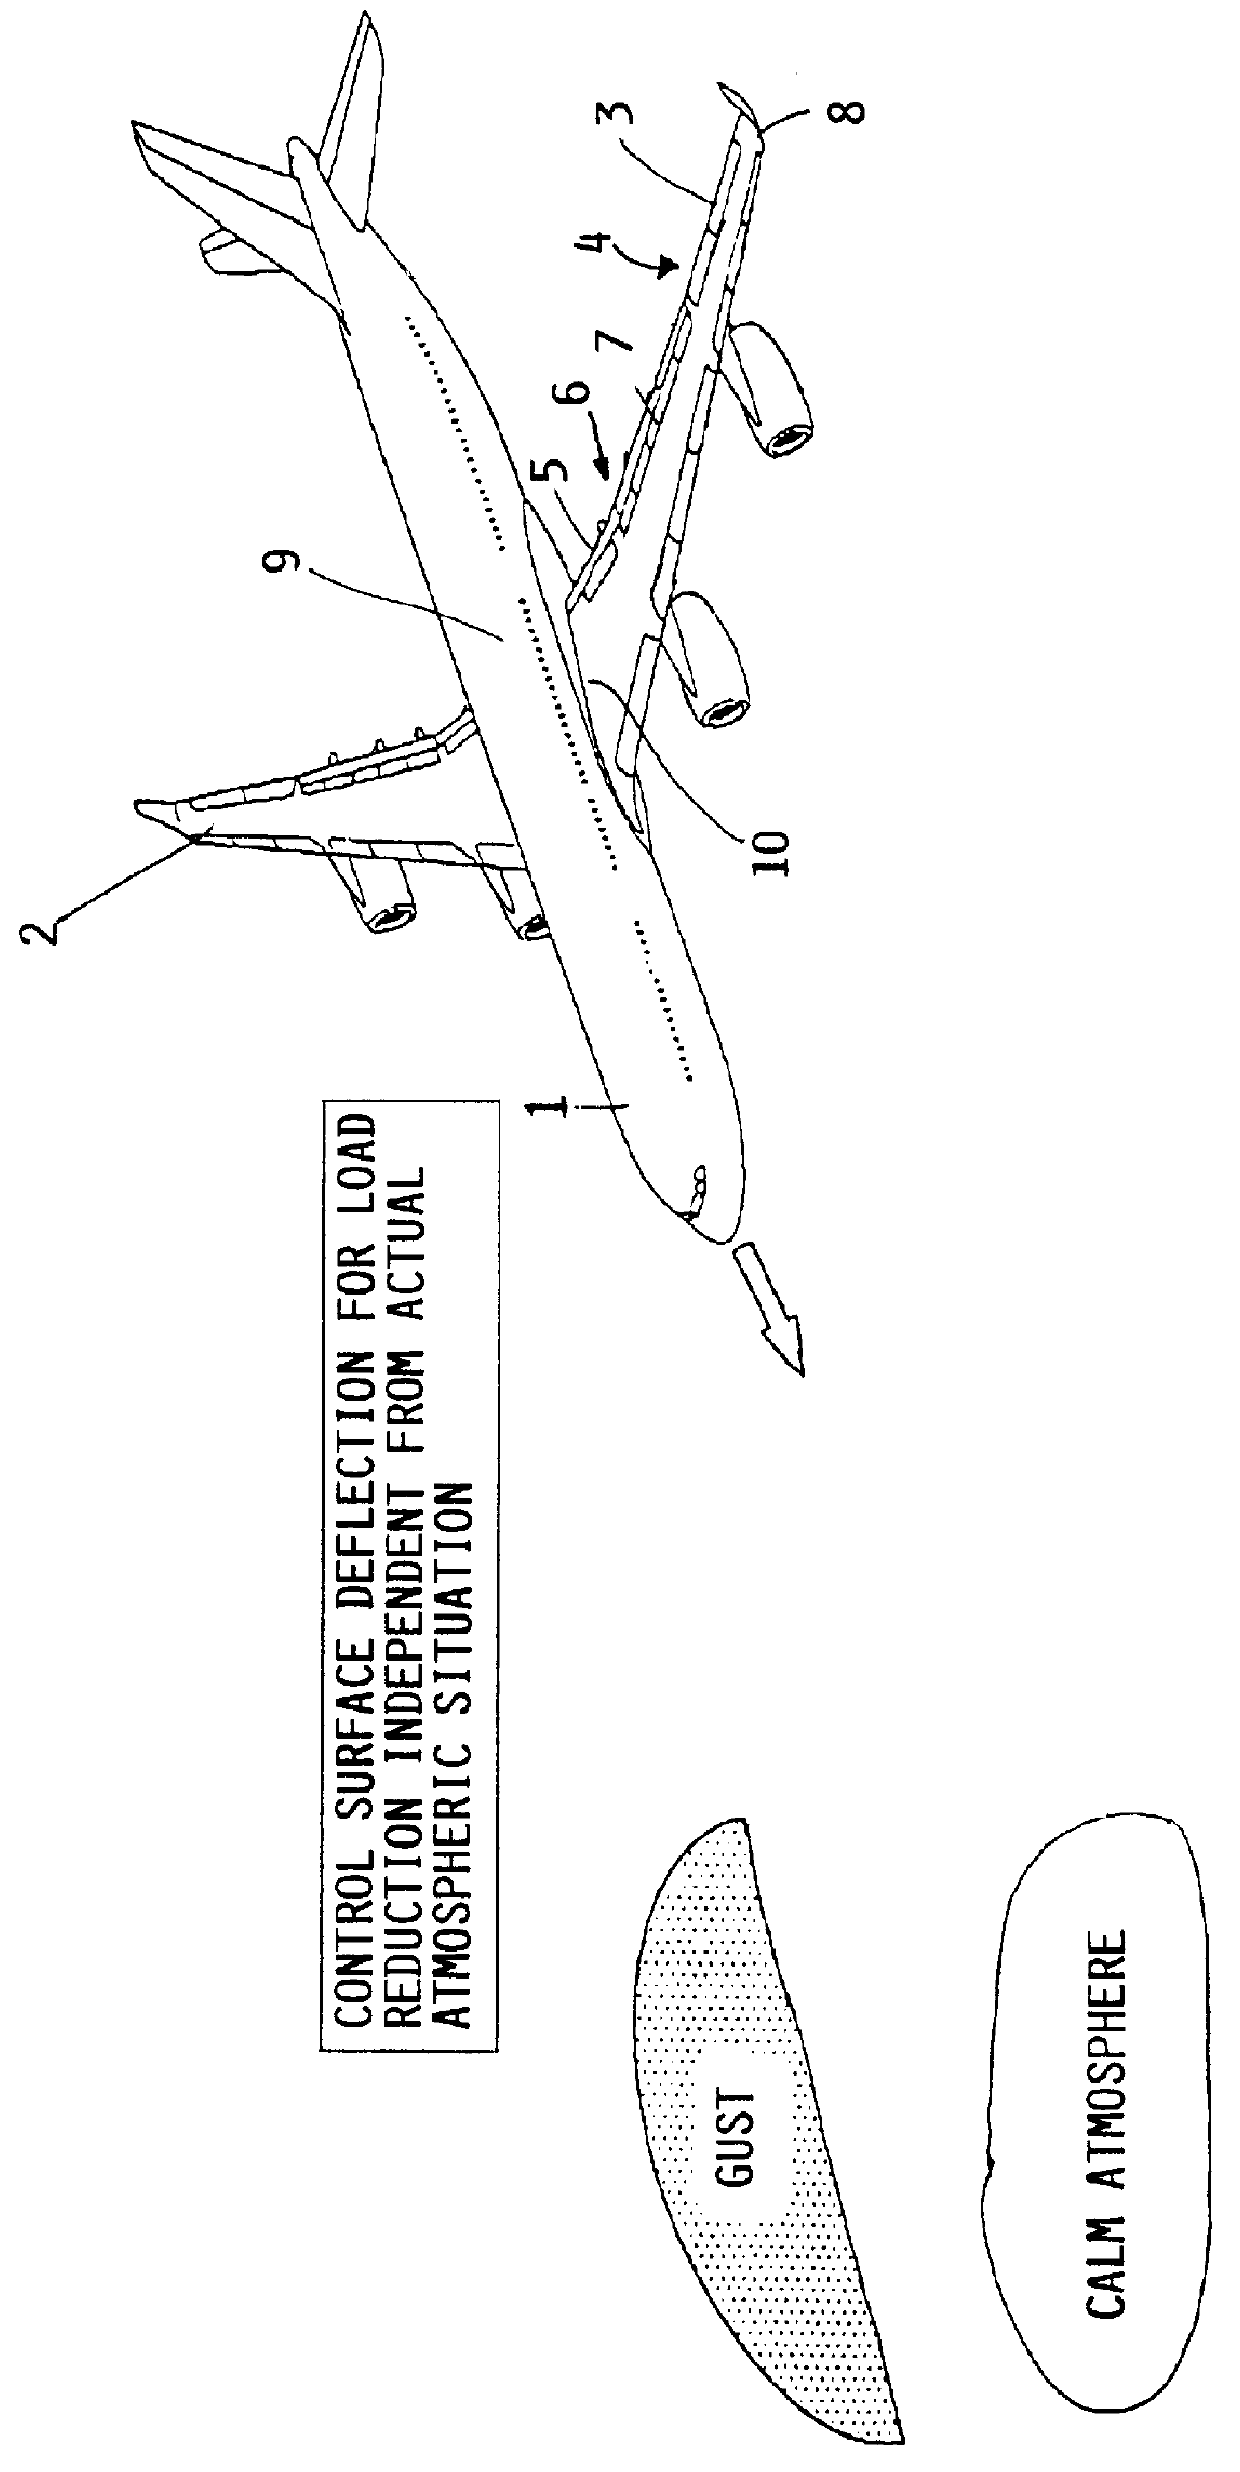 Method of reducing wind gust loads acting on an aircraft